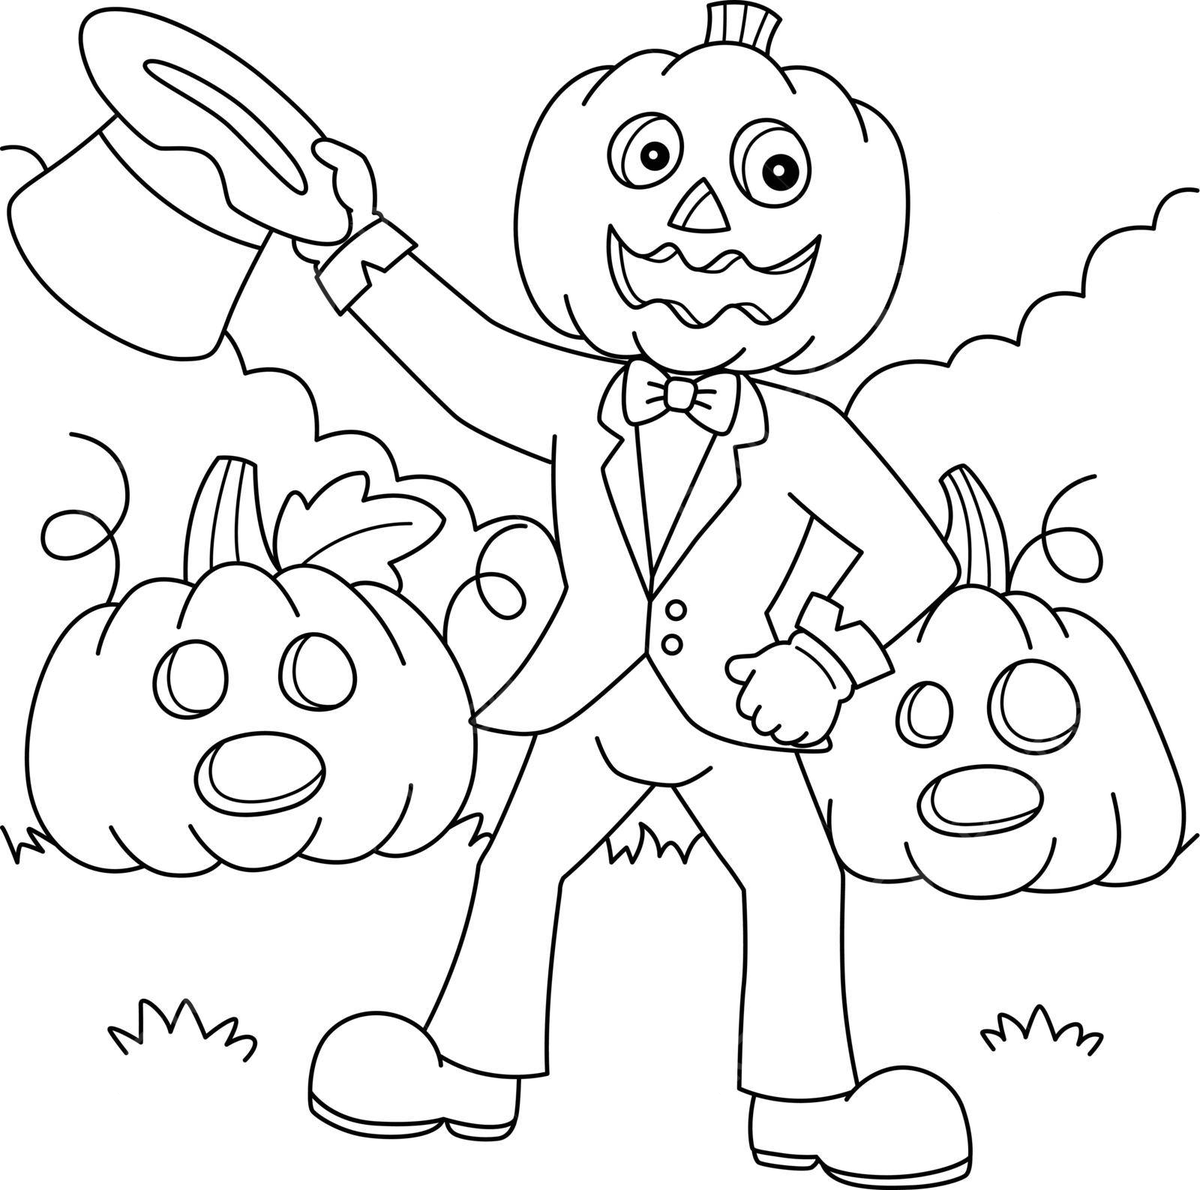 Halloween coloring page for kids featuring a man with a pumpkin head vector hand drawn silhouette toddler png and vector with transparent background for free download